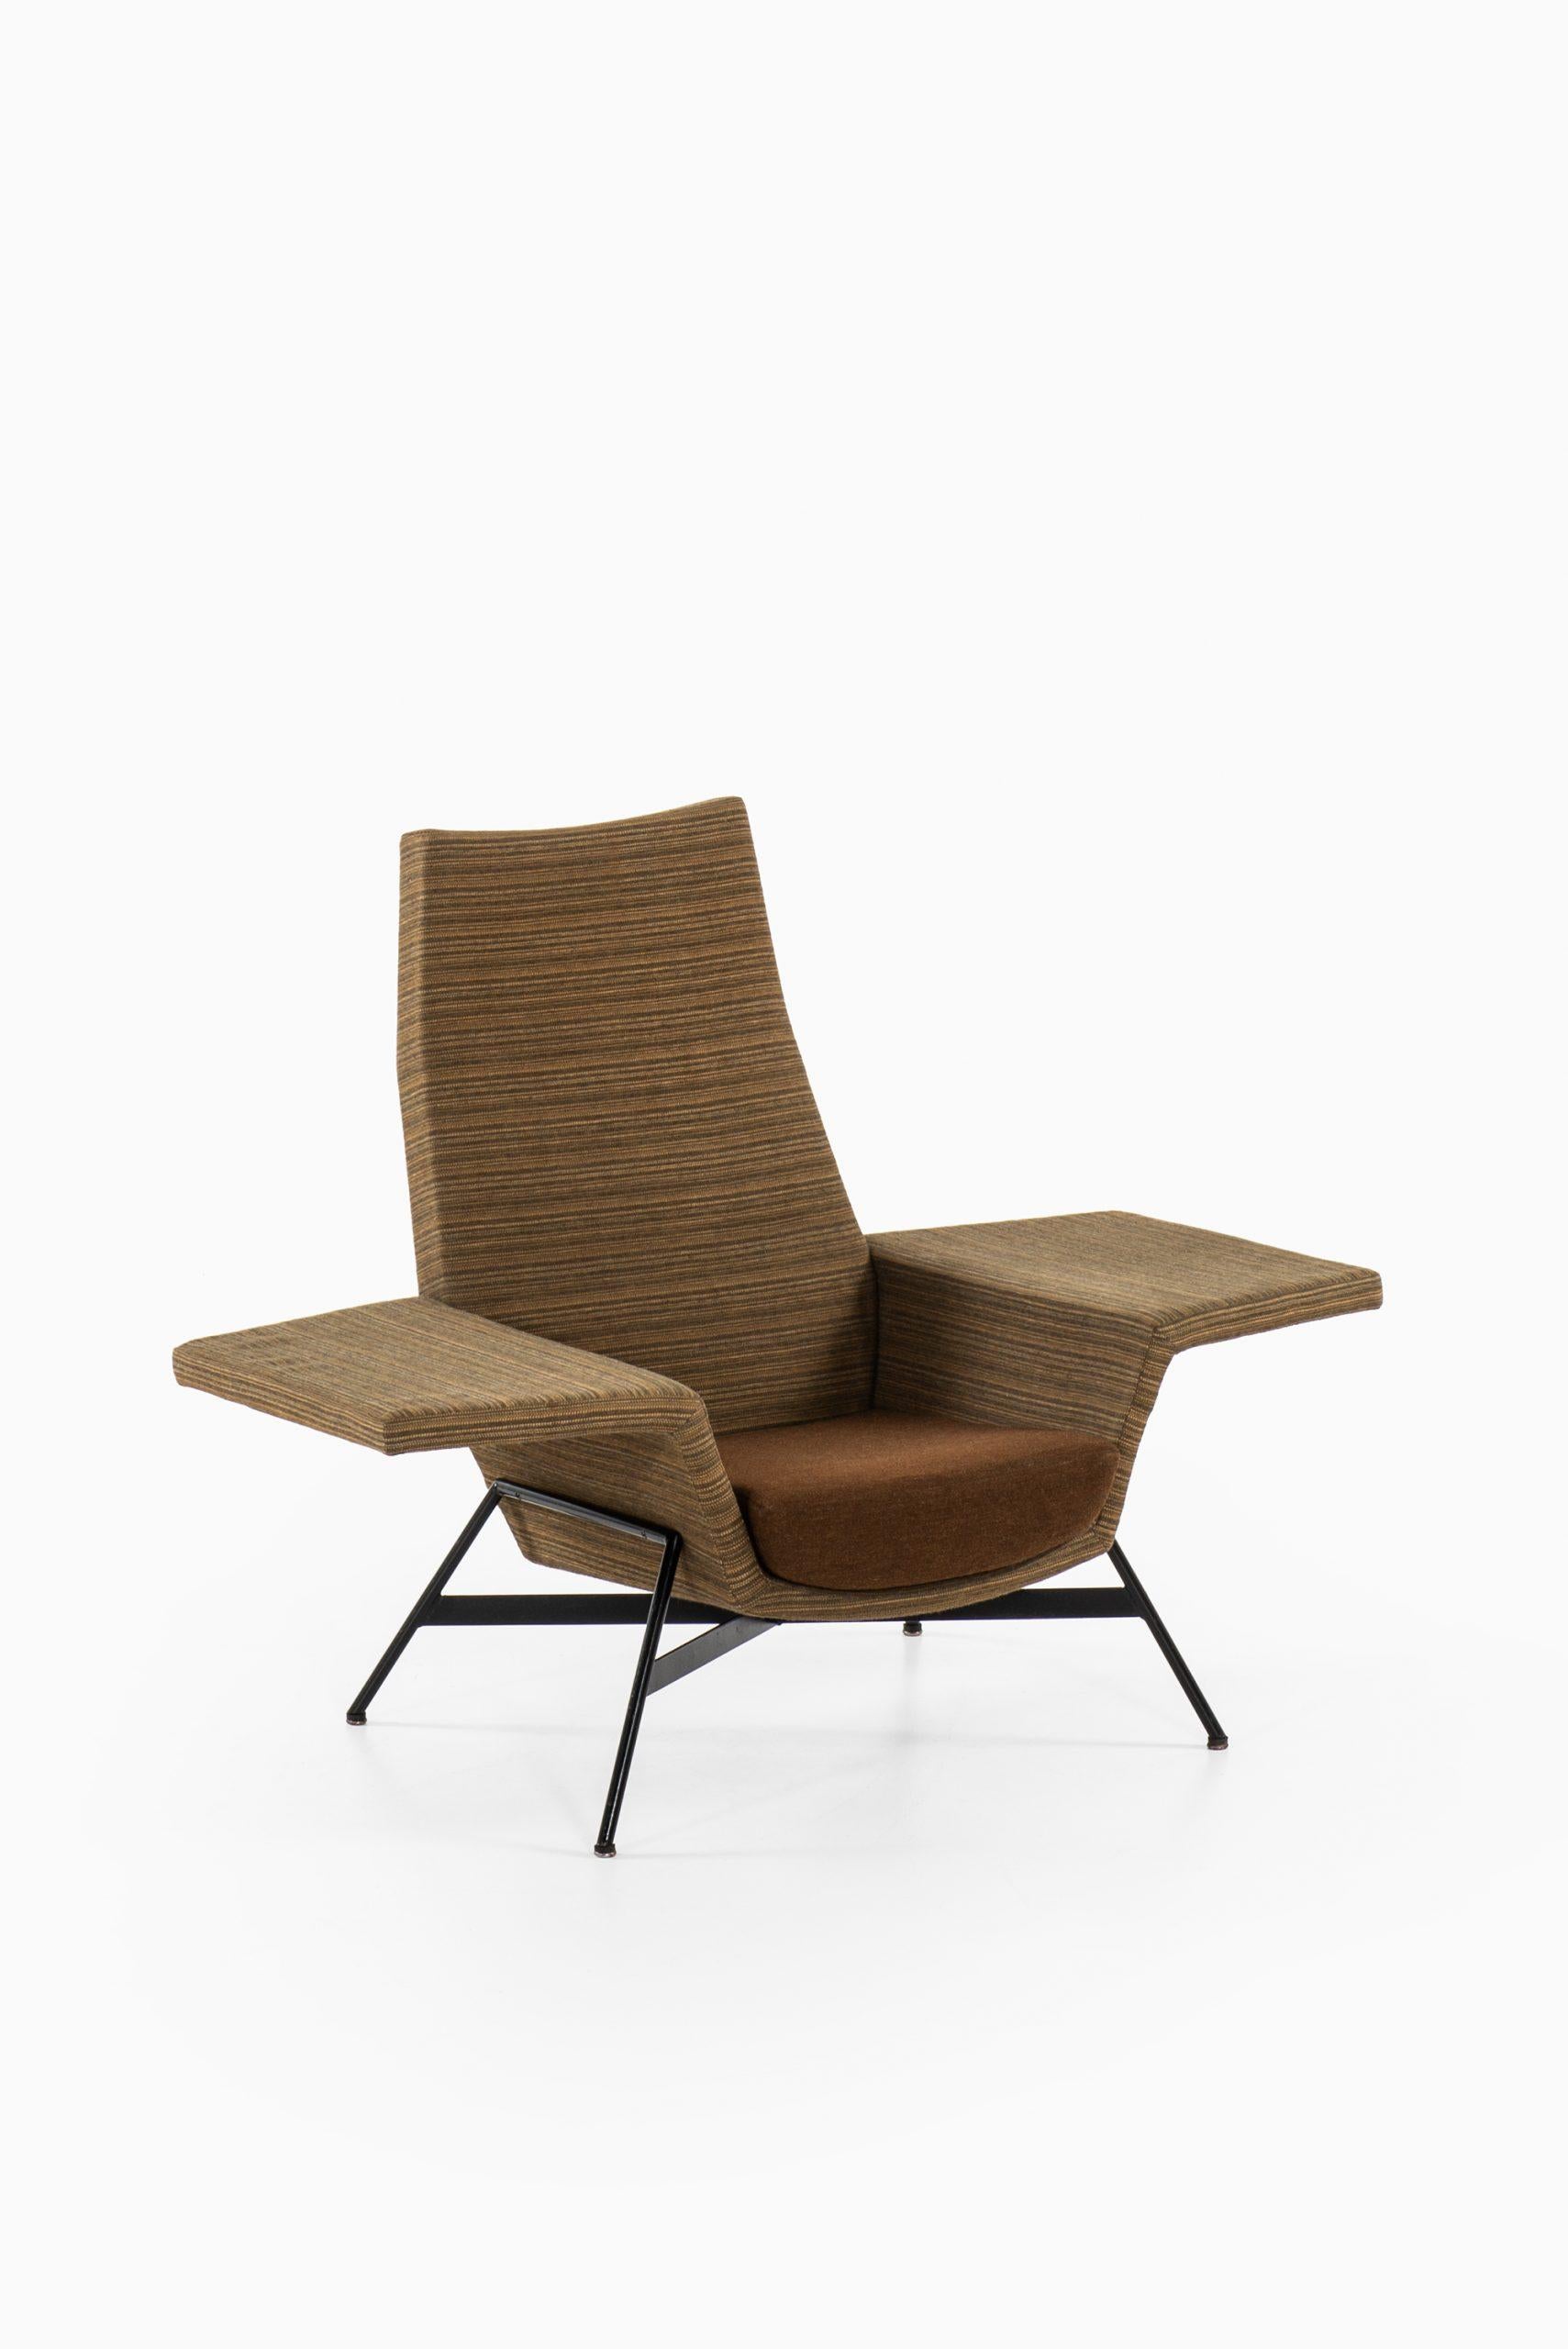 Steel Otto Kolbe Easy Chair Produced by Walter Knoll in America For Sale